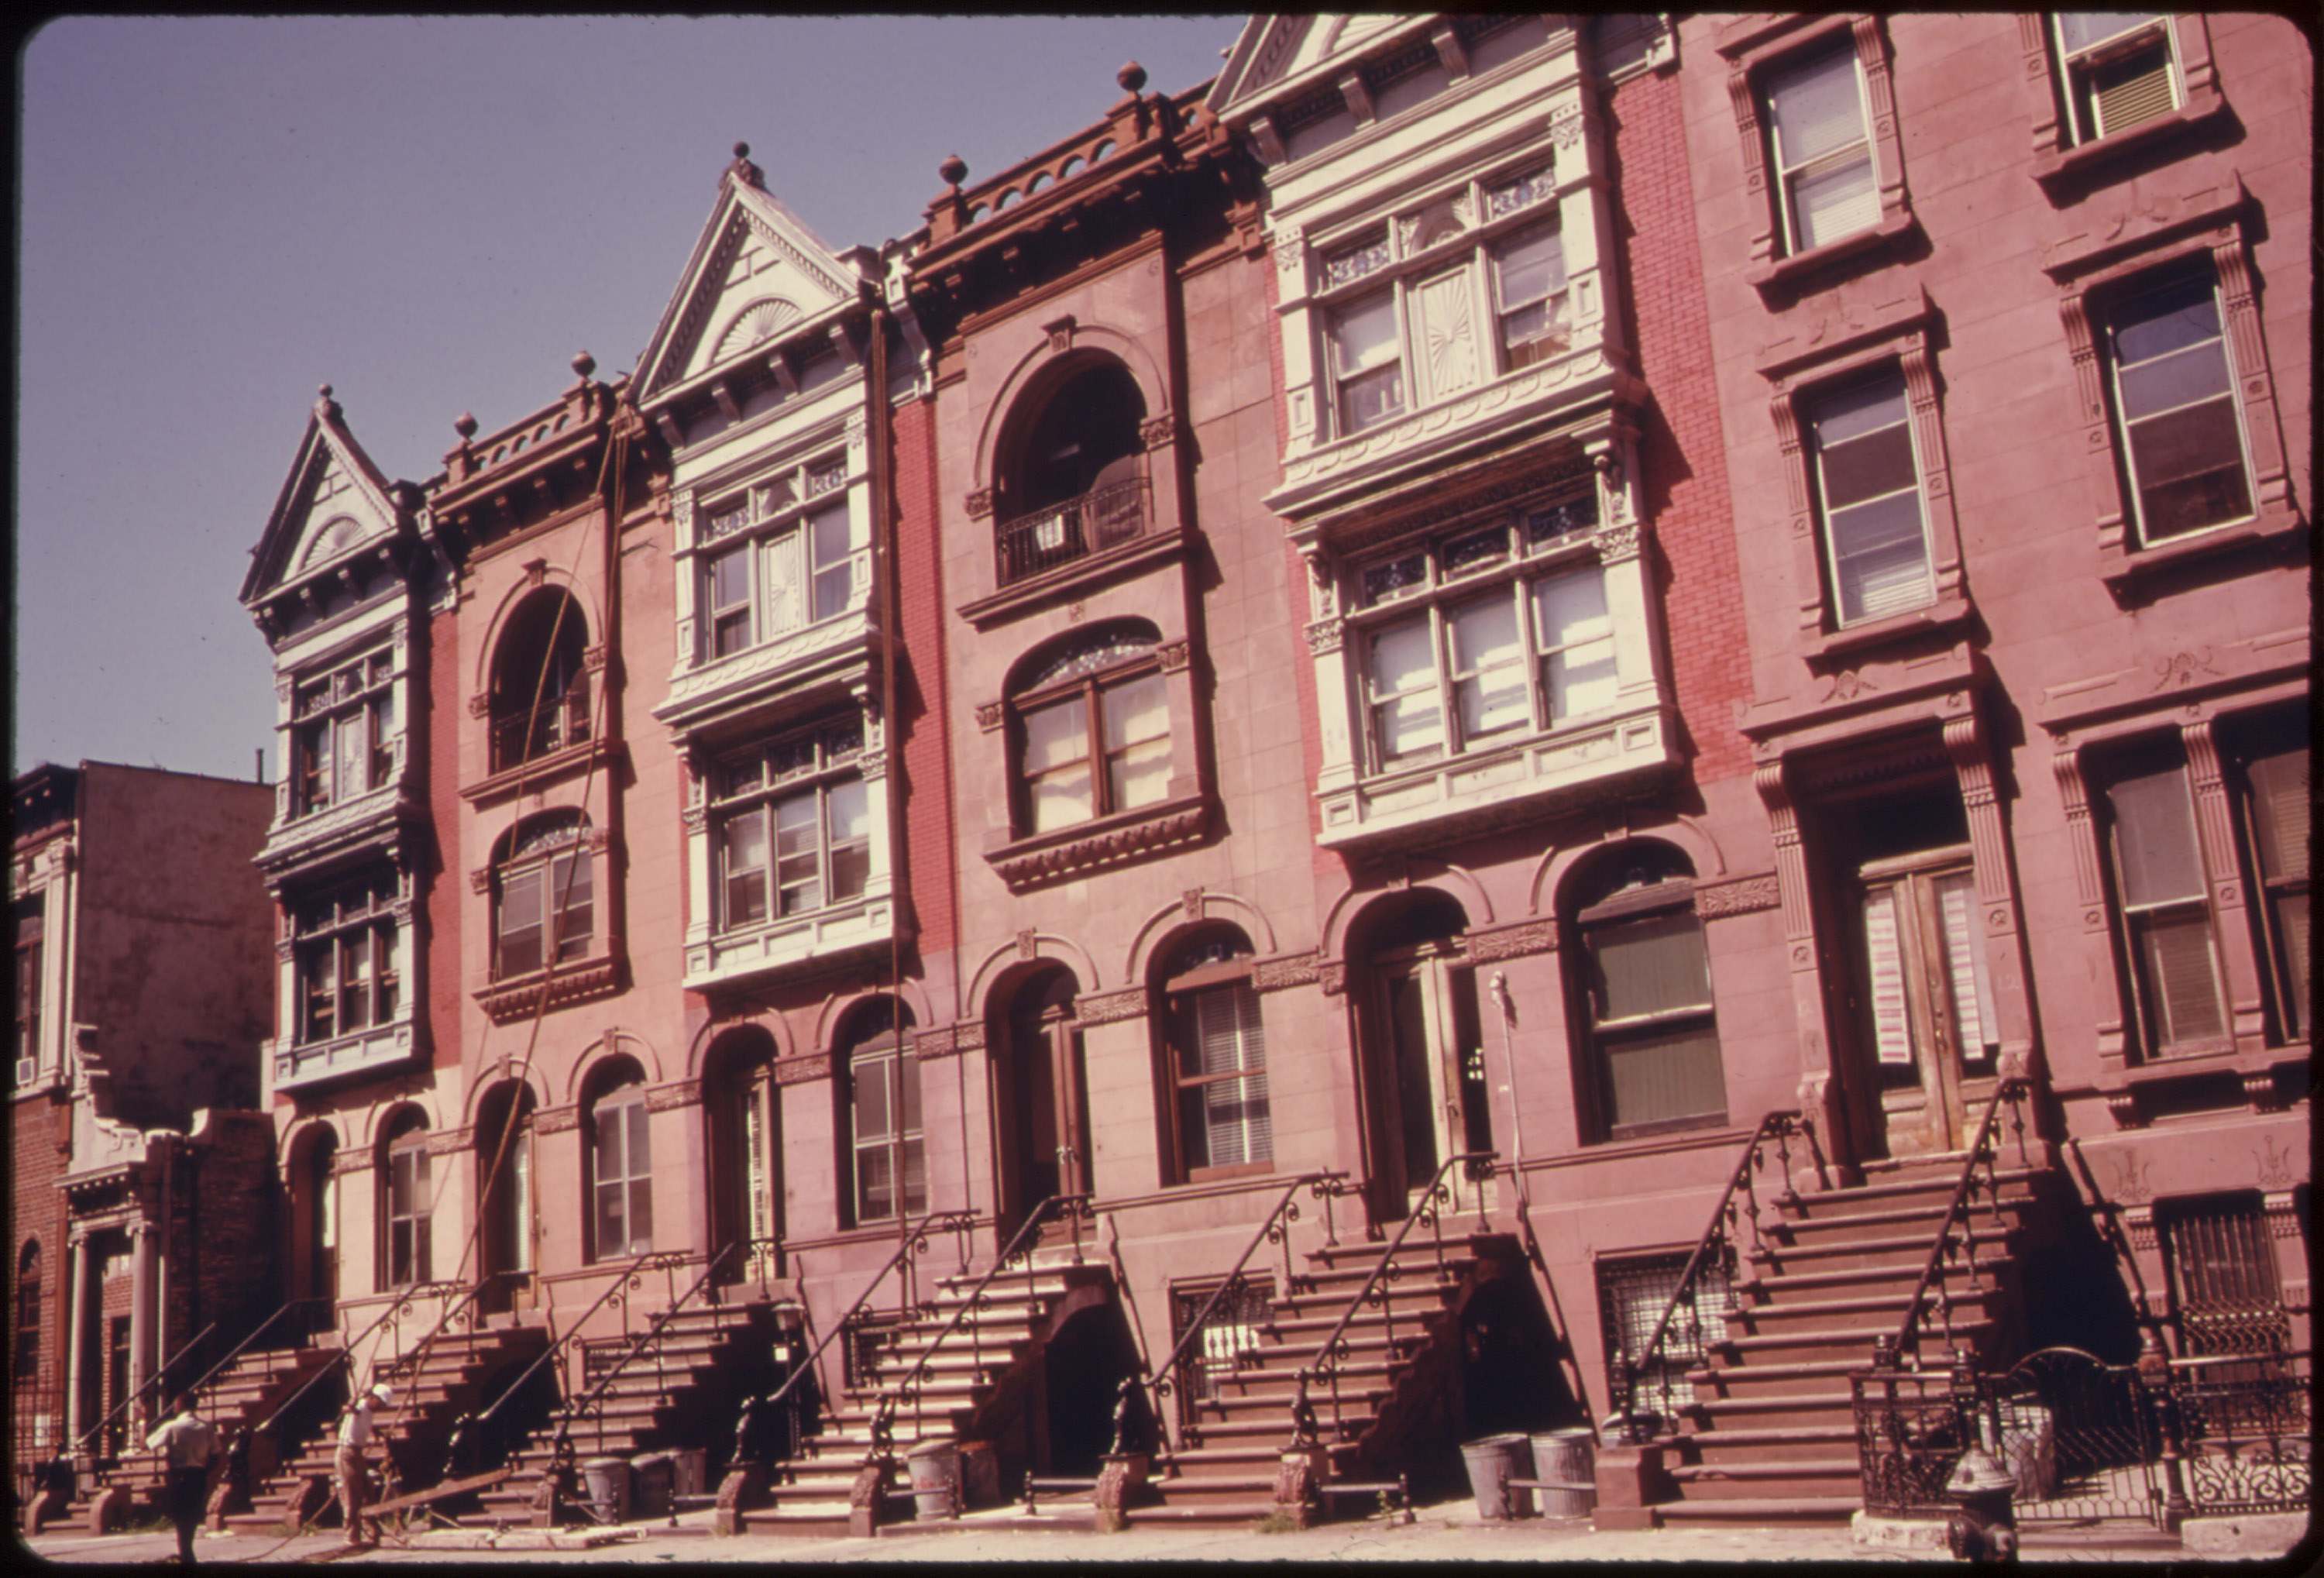 Turn of the century brownstone apartments being gentrified, Brooklyn, July 1974.